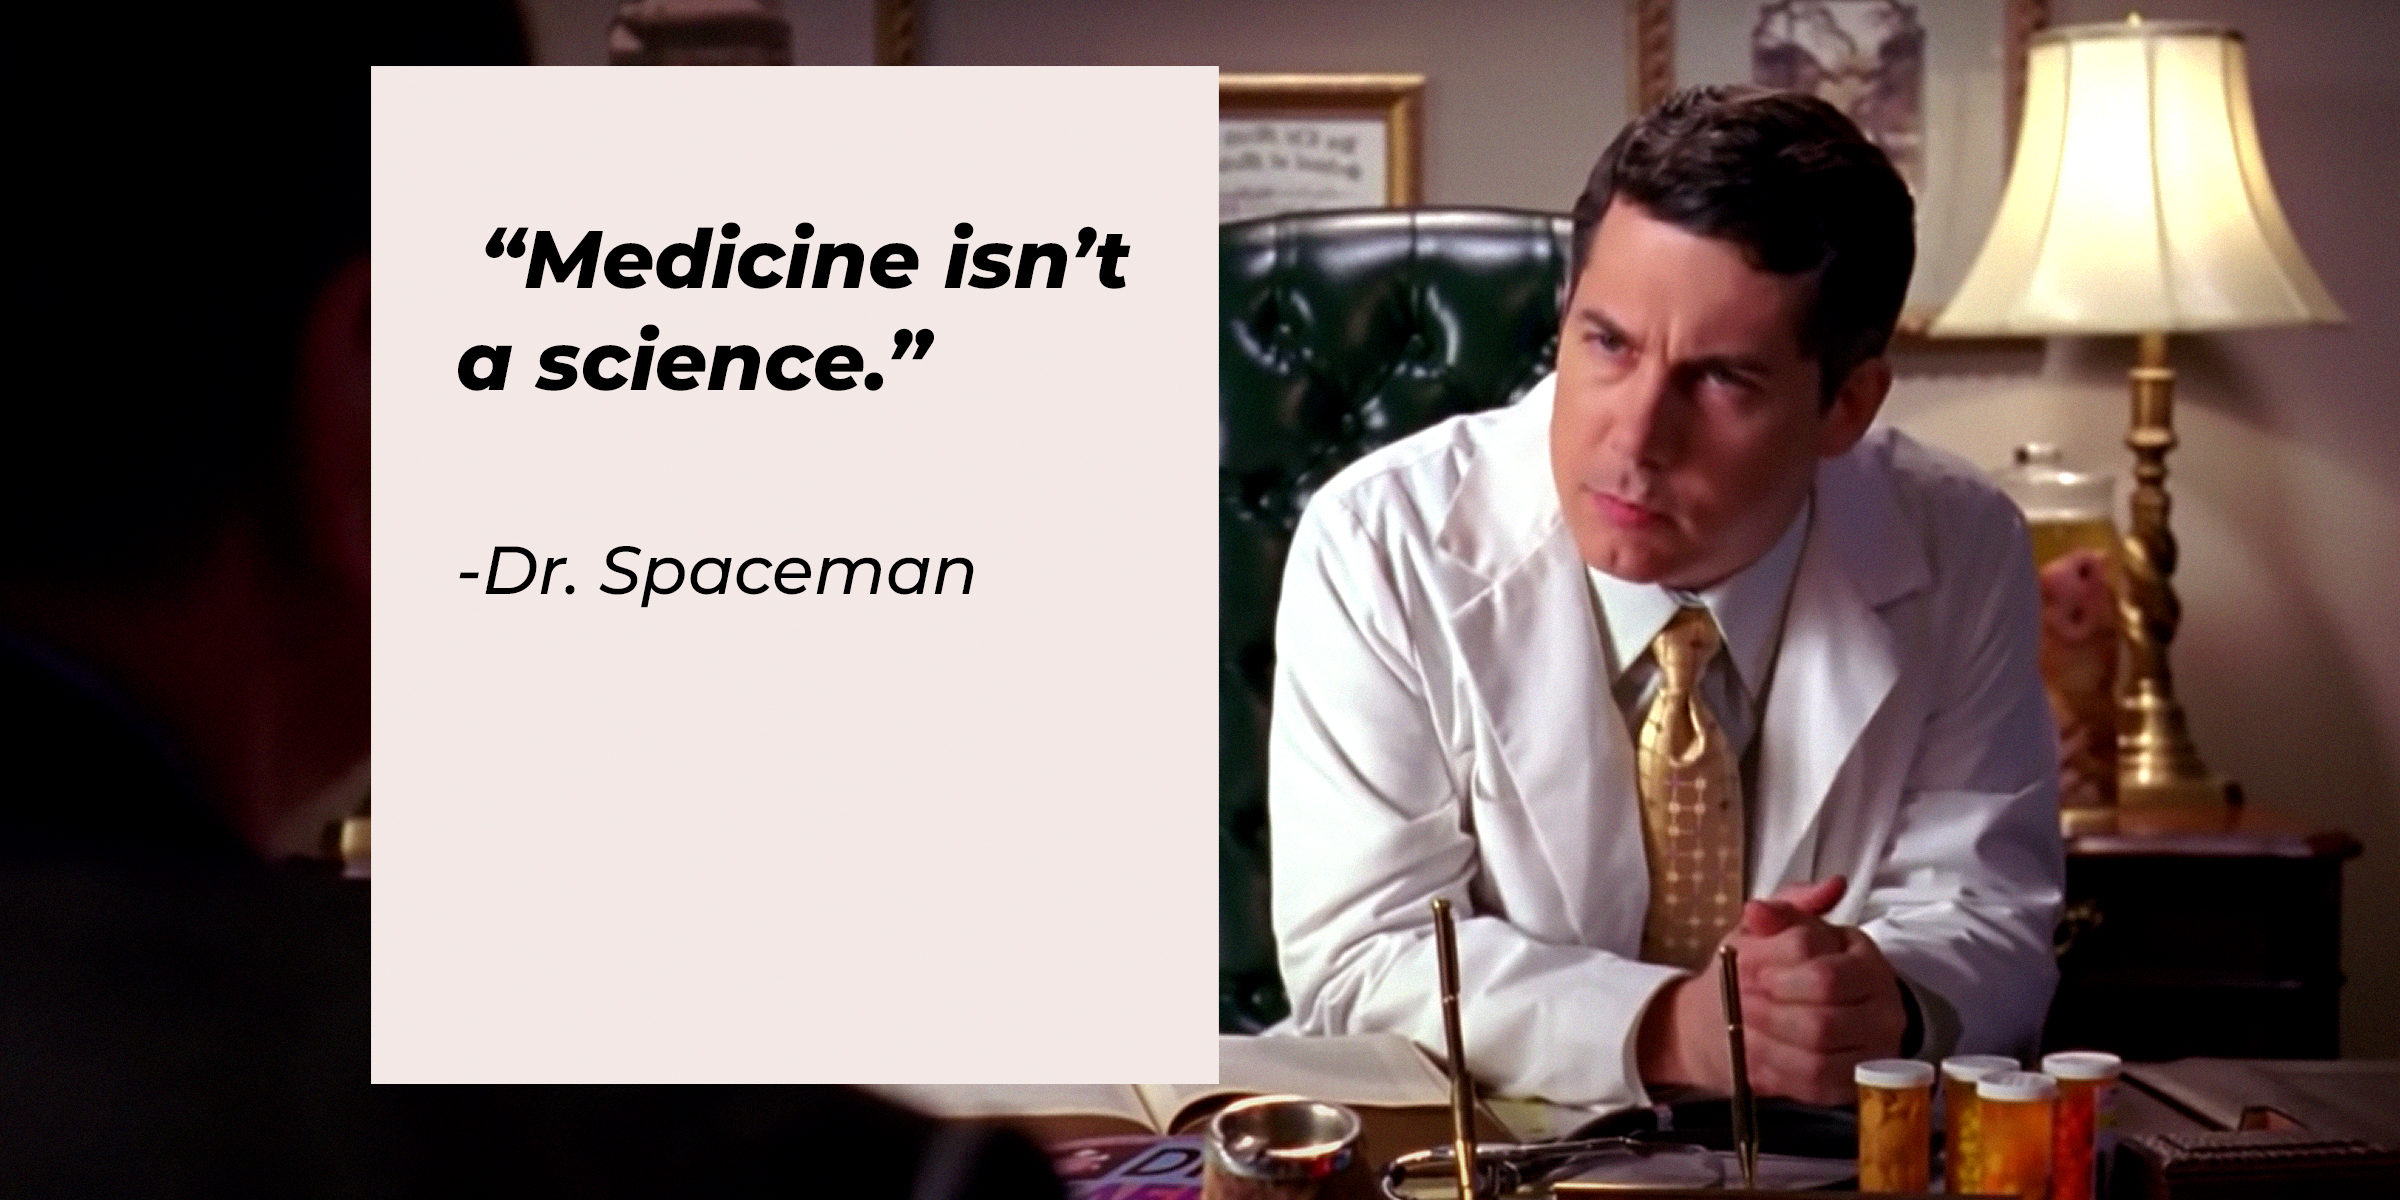 Dr. Spaceman with his quote: "Medicine isn't a science." | Source: youtube.com/30Rock